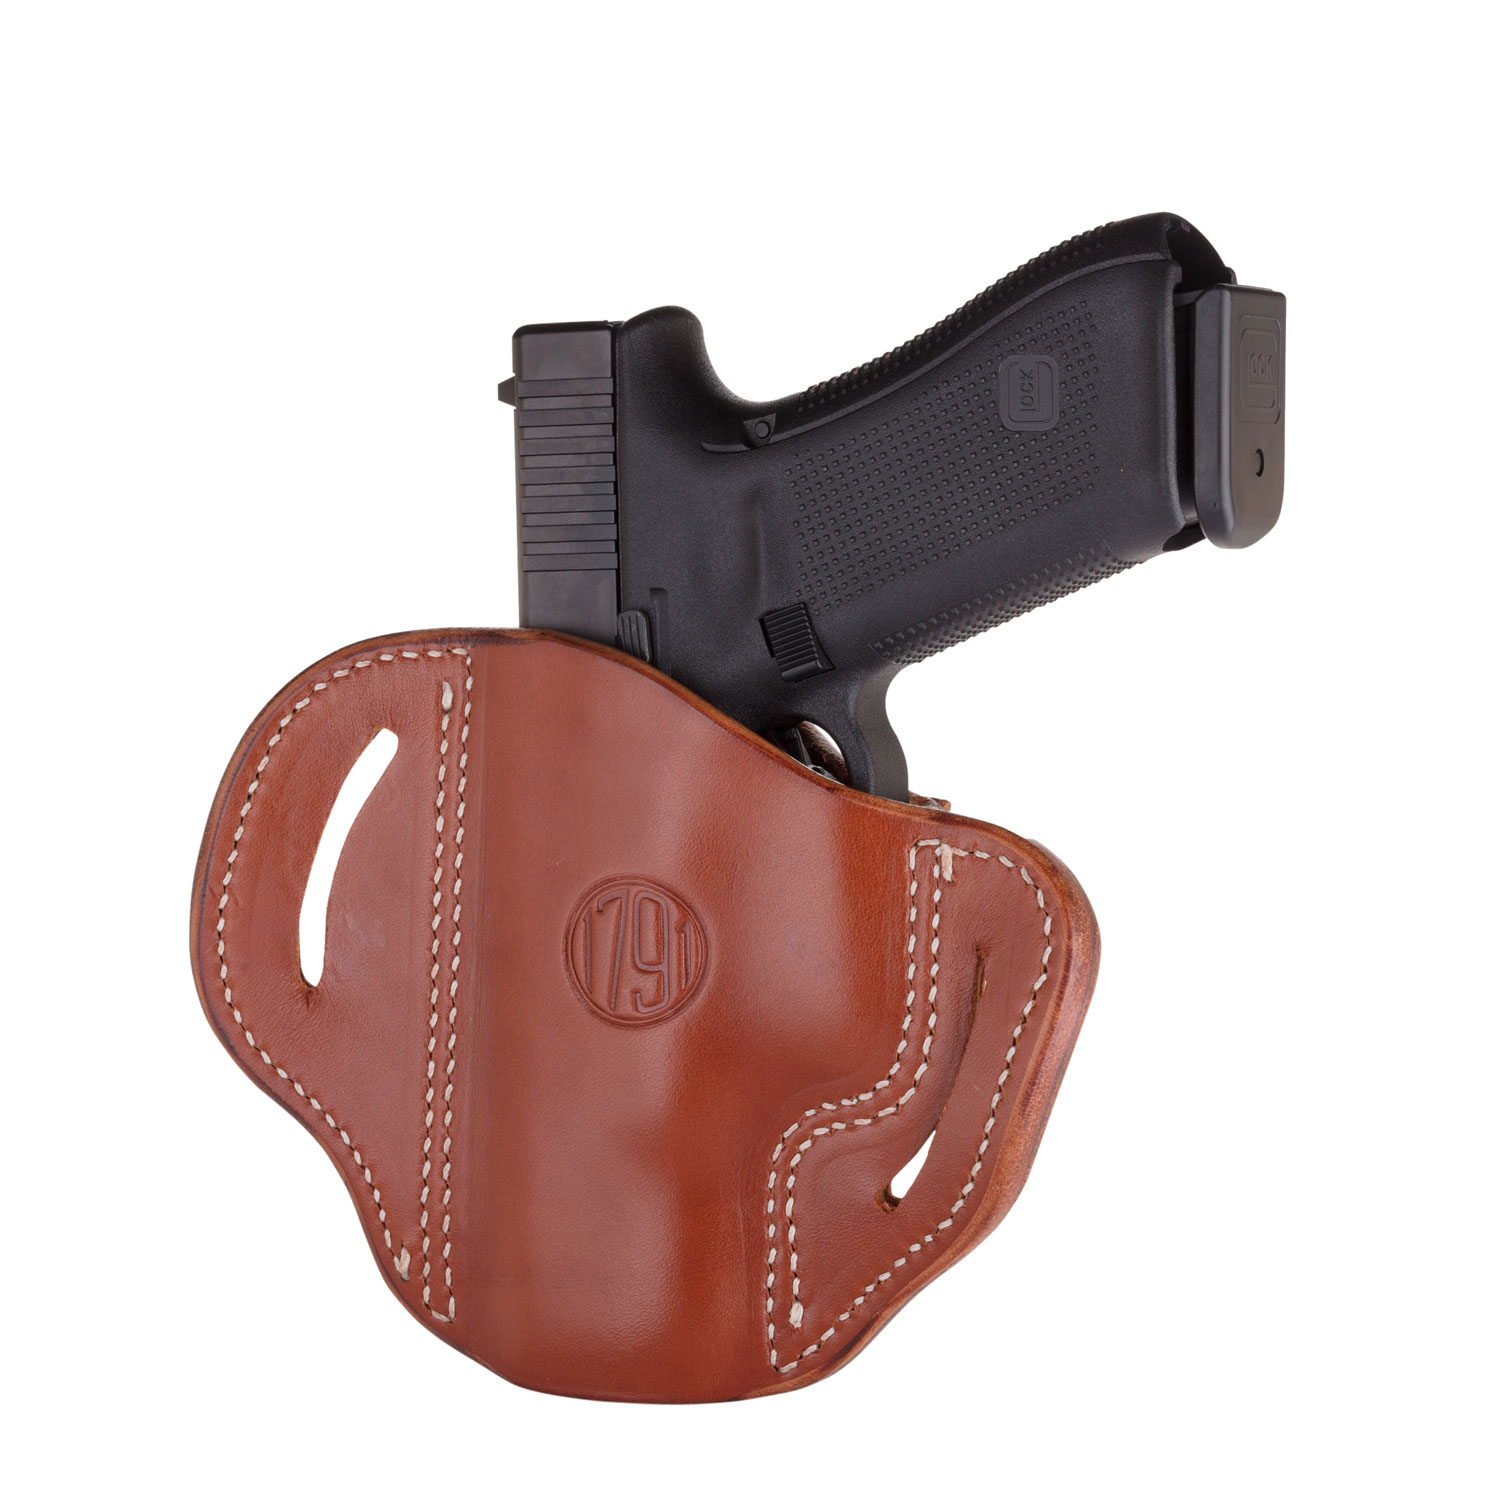 1791 Gunleather ORBH24CBRR BH2.4 Optic Ready OWB 2.4 Classic Brown Leather Belt Slide Fits Walther PPQ/Sig P320/Springfield XD-M